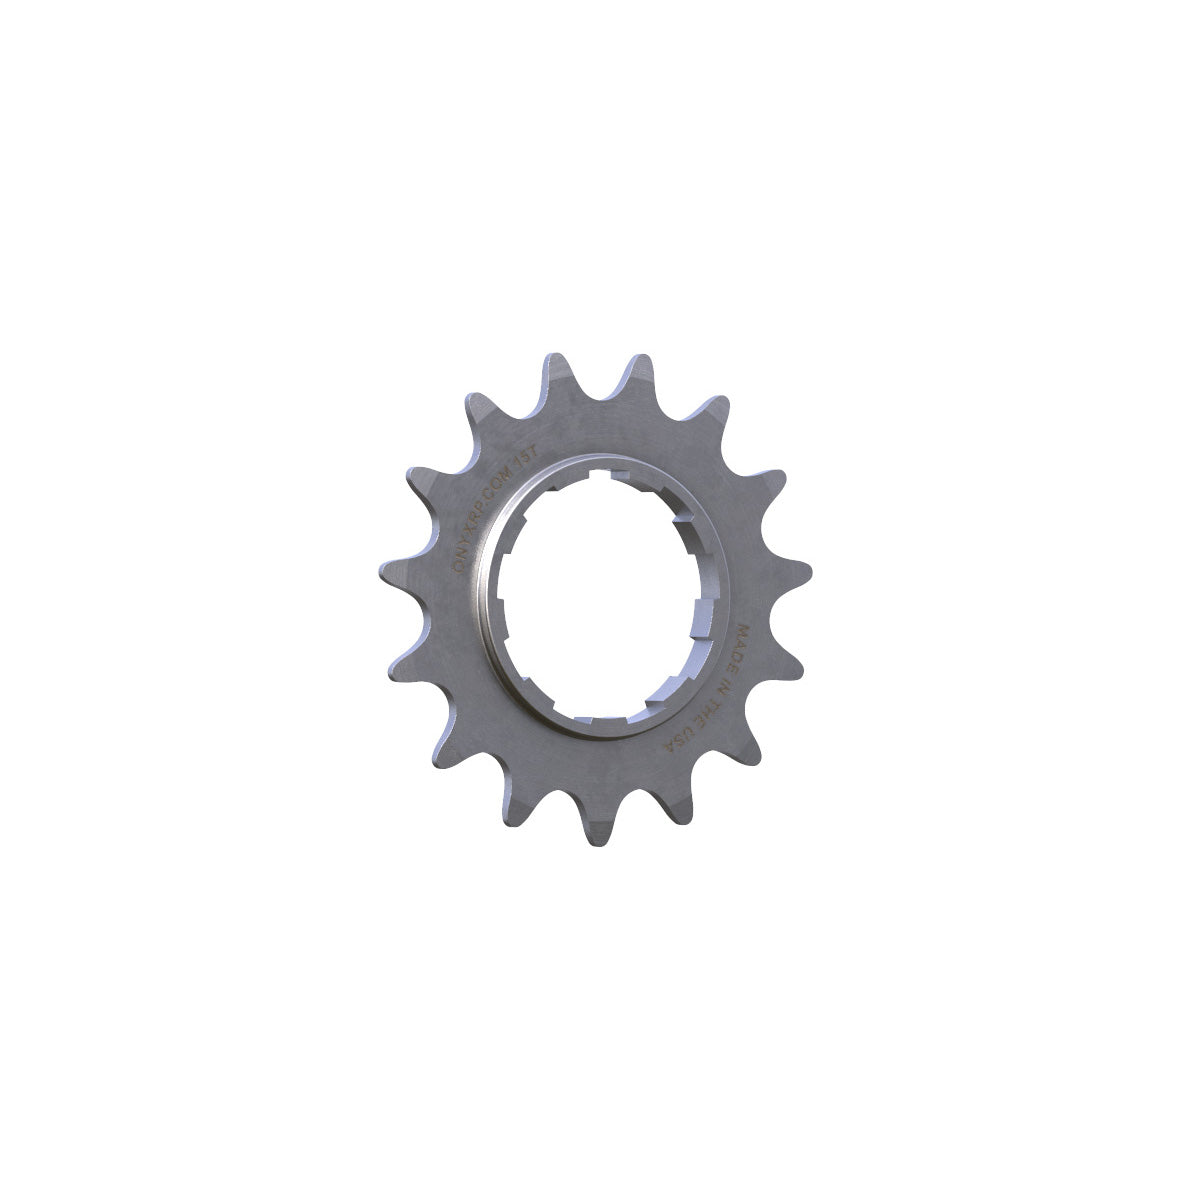 Onyx Racing 15t Stainless Steel Cog for BMX Cassette hubs - 3/32"